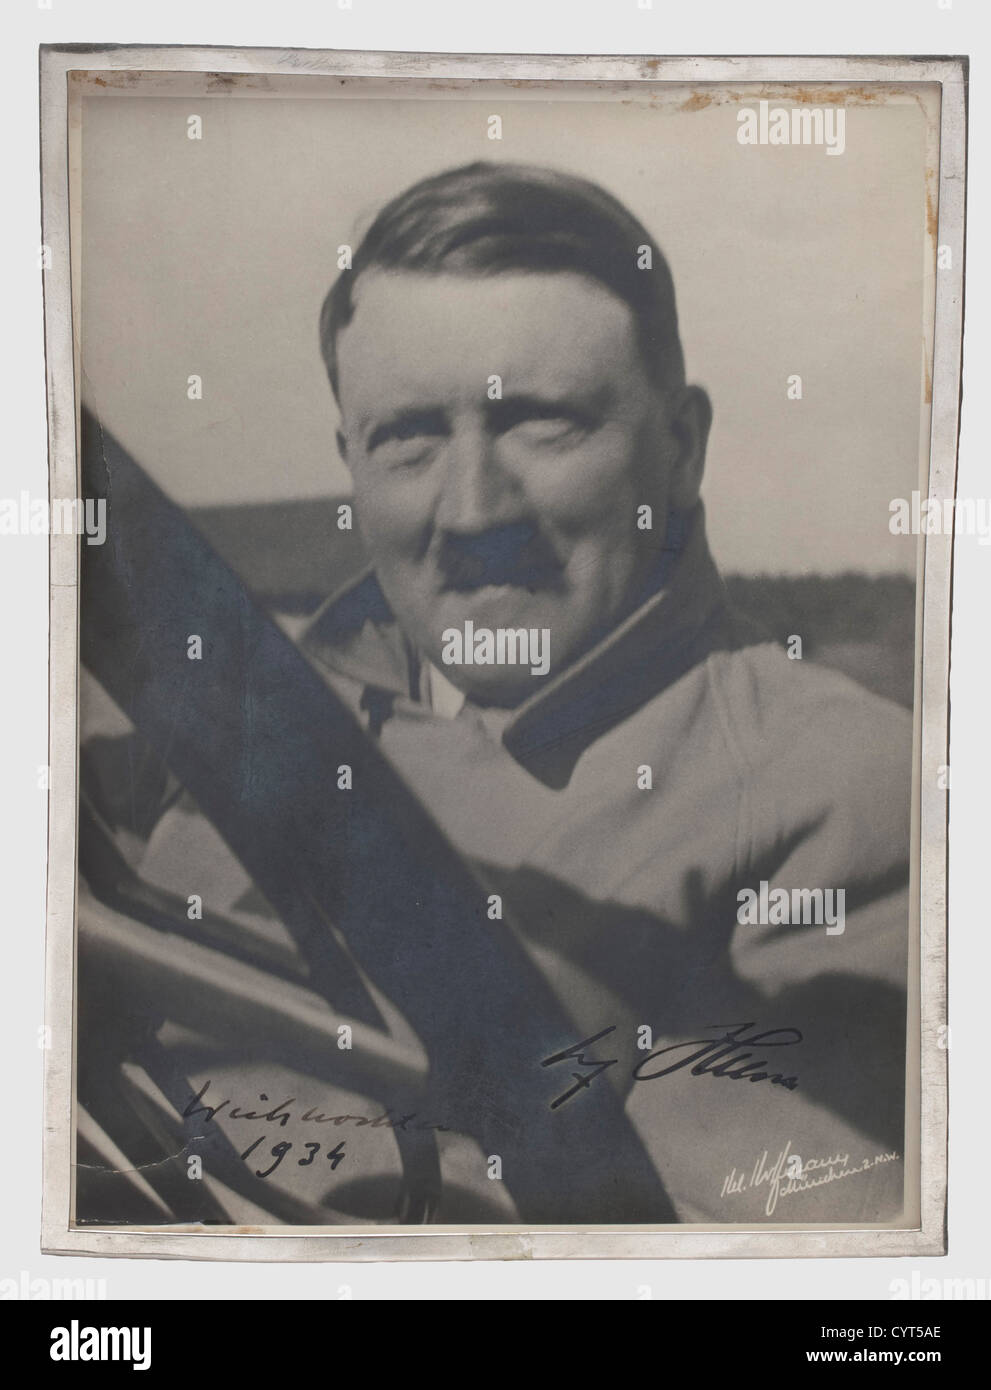 Adolf Hitler,a dedication photo 1934 Autograph signature and date in thick,black ink 'Weihnachten 1934 Adolf Hitler'(Christmas 1934 Adolf Hitler)on a large format Hoffmann photograph(dented on the lower edge)of Hitler in a coat sitting in the passenger's seat of an Mercedes convertible. The photographer's signature on the lower rim,'H. Hoffmann,München 2.N.W.' and the Hoffmann stamp on the back. Glued to the back piece of a simple,damaged(glass missing)tabletop frame. From the legacy of a high official of Daimler-Benz,historic,historical,people,1,Additional-Rights-Clearences-Not Available Stock Photo